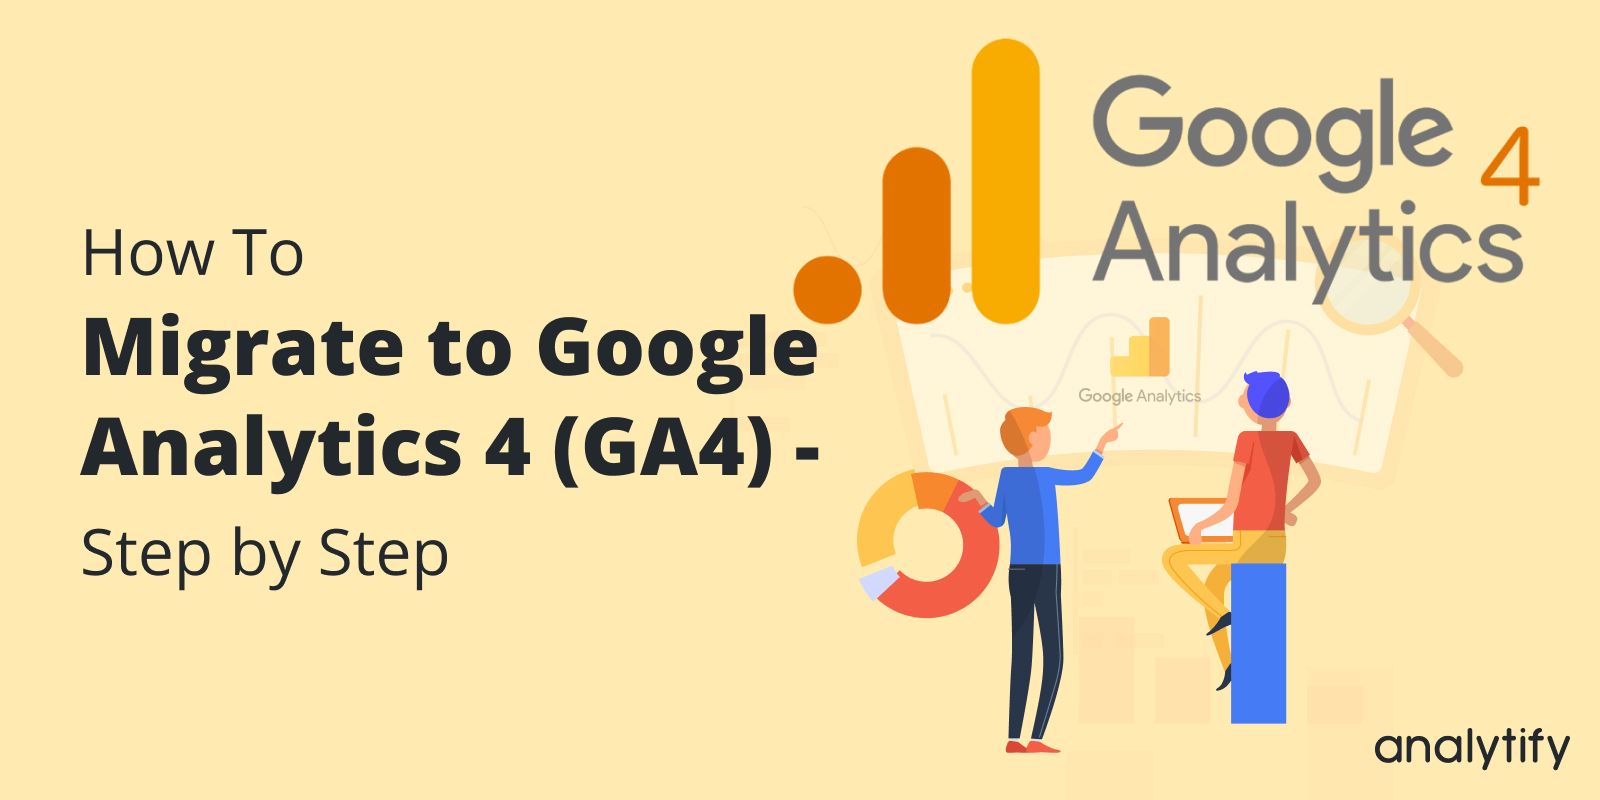 How to Migrate to Google Analytics 4